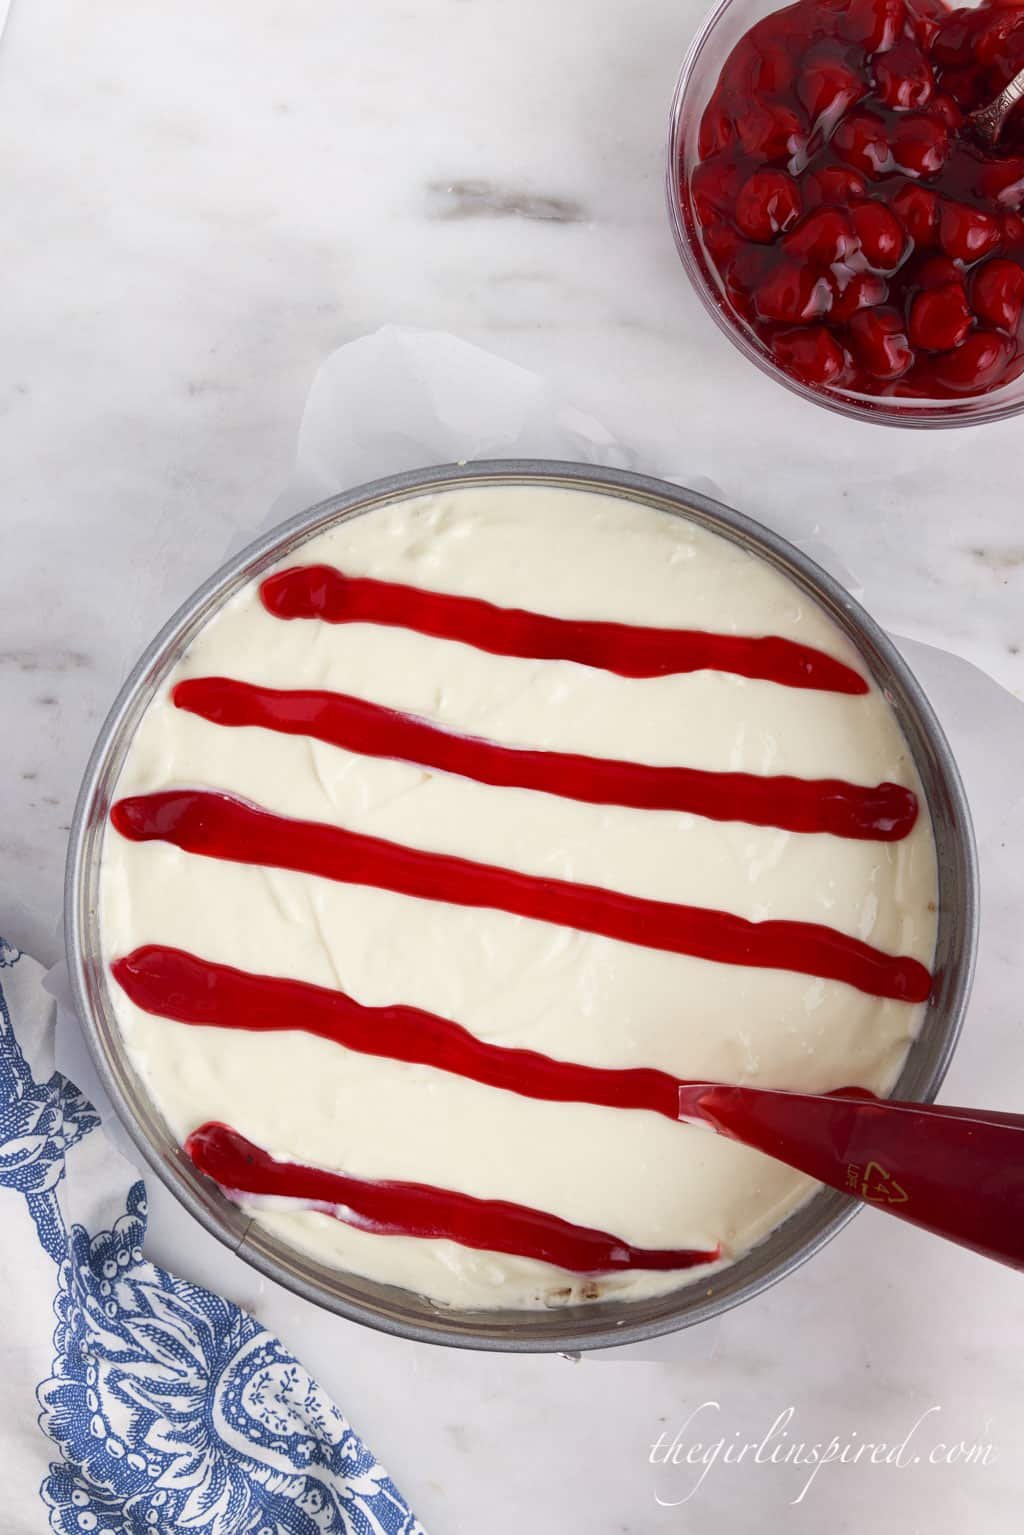 Cheesecake piped with cherry pie filling in stripes.